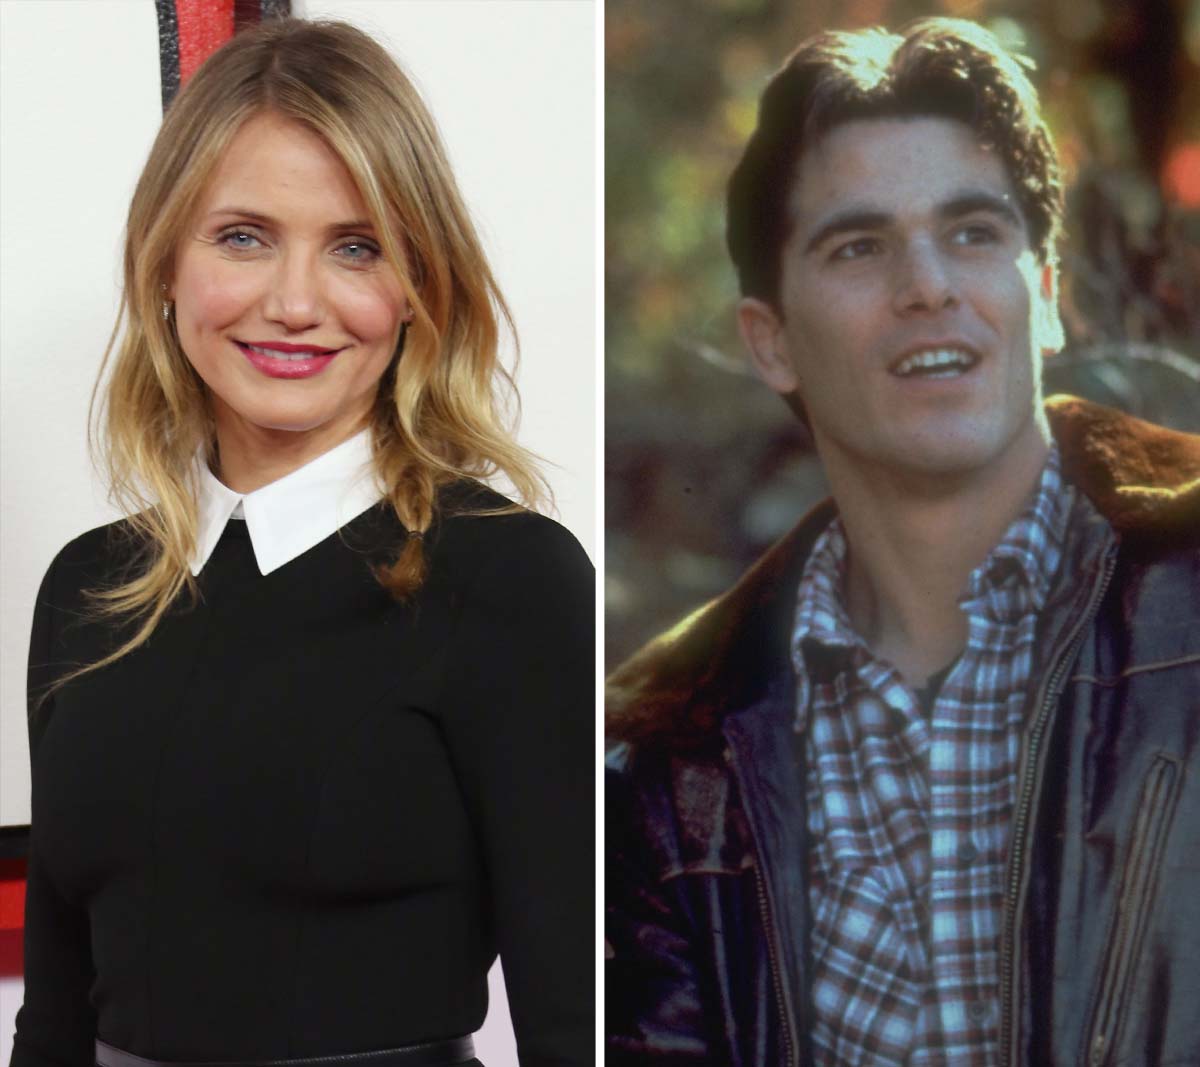 Stars Who Left Hollywood Behind: Cameron Diaz, Michael Schoeffling and More